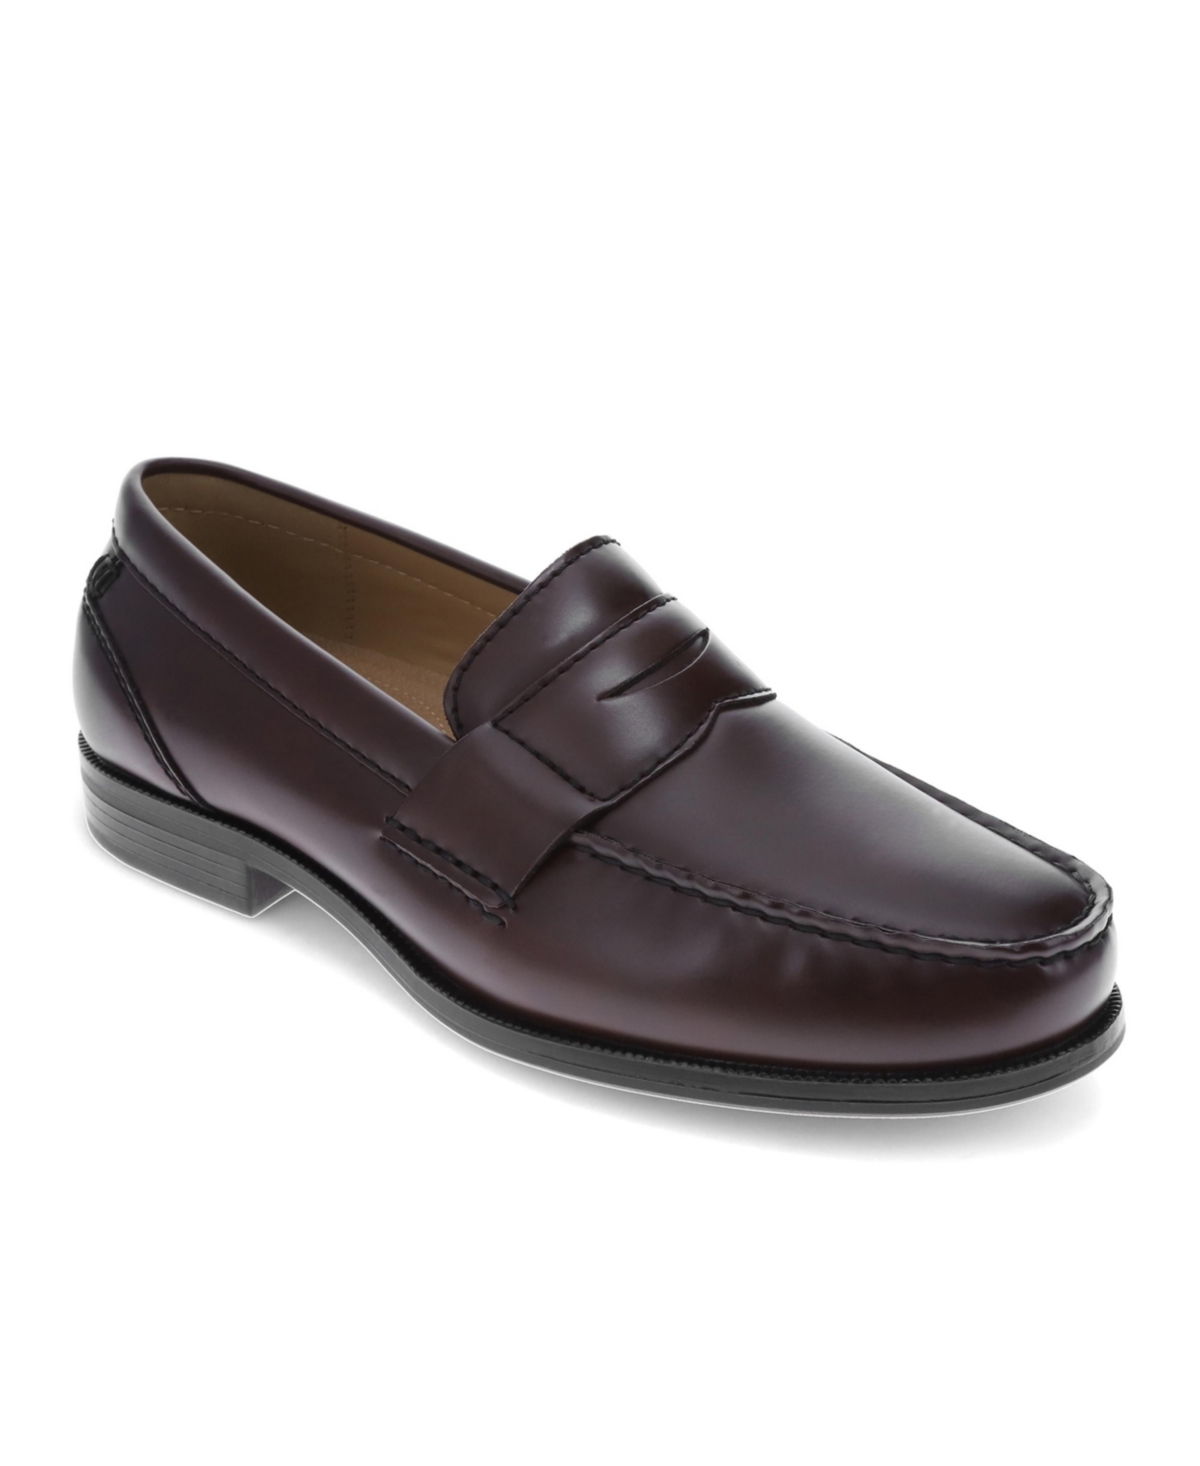 Dockers Men's Colleague Dress Penny Loafer Shoes In Cordovan